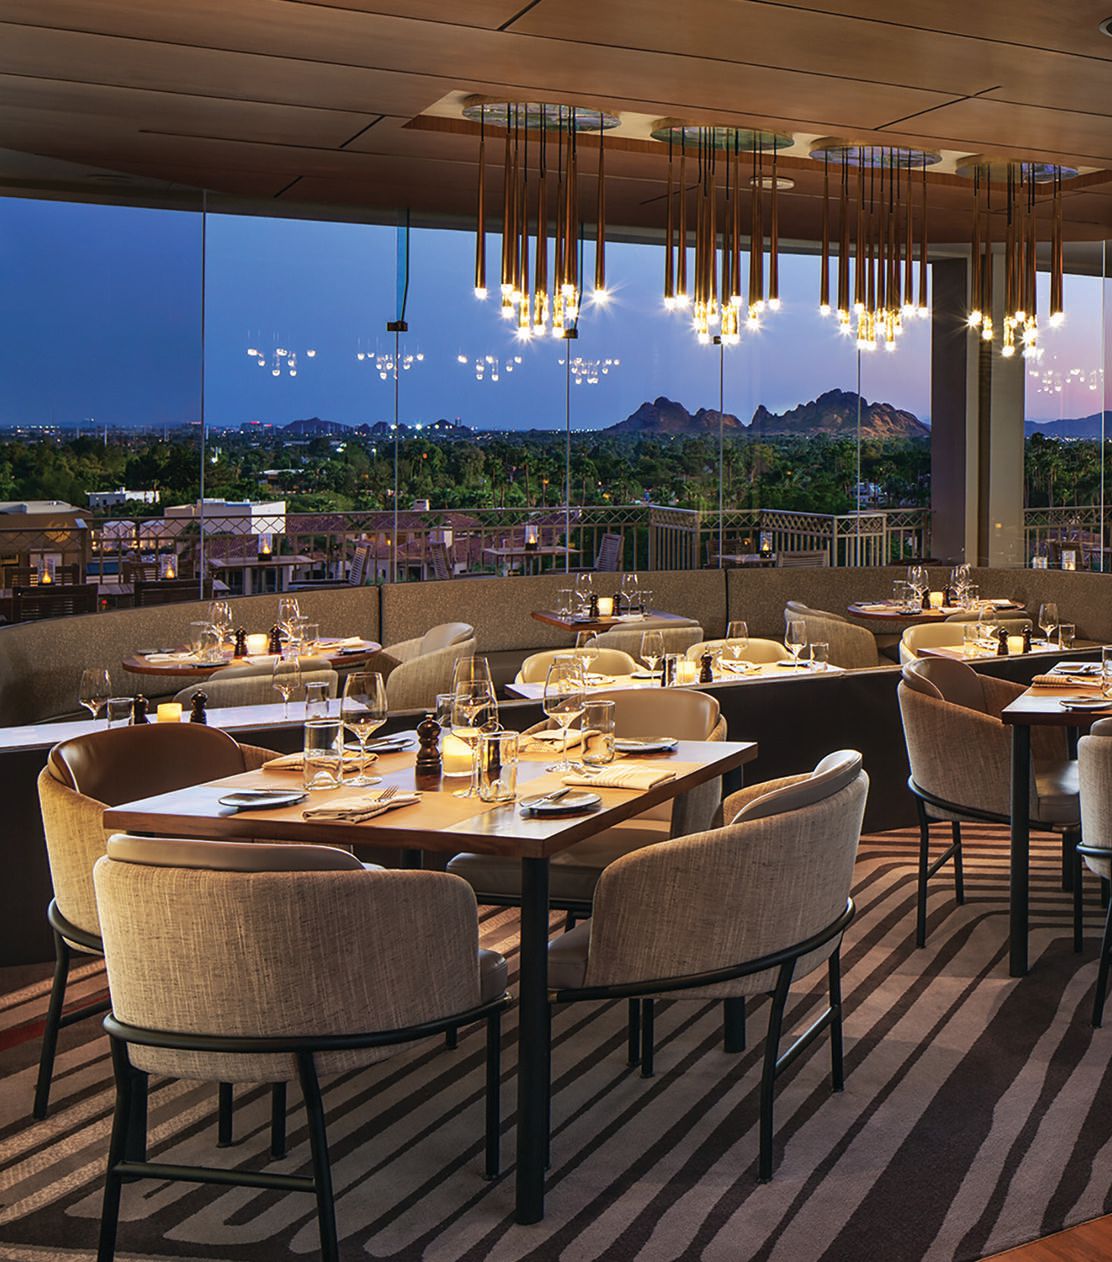 The romantic atmosphere at Th e Phoenician’s J&G Steakhouse makes it perfect for date nights. PHOTO COURTESY OF BRANDS